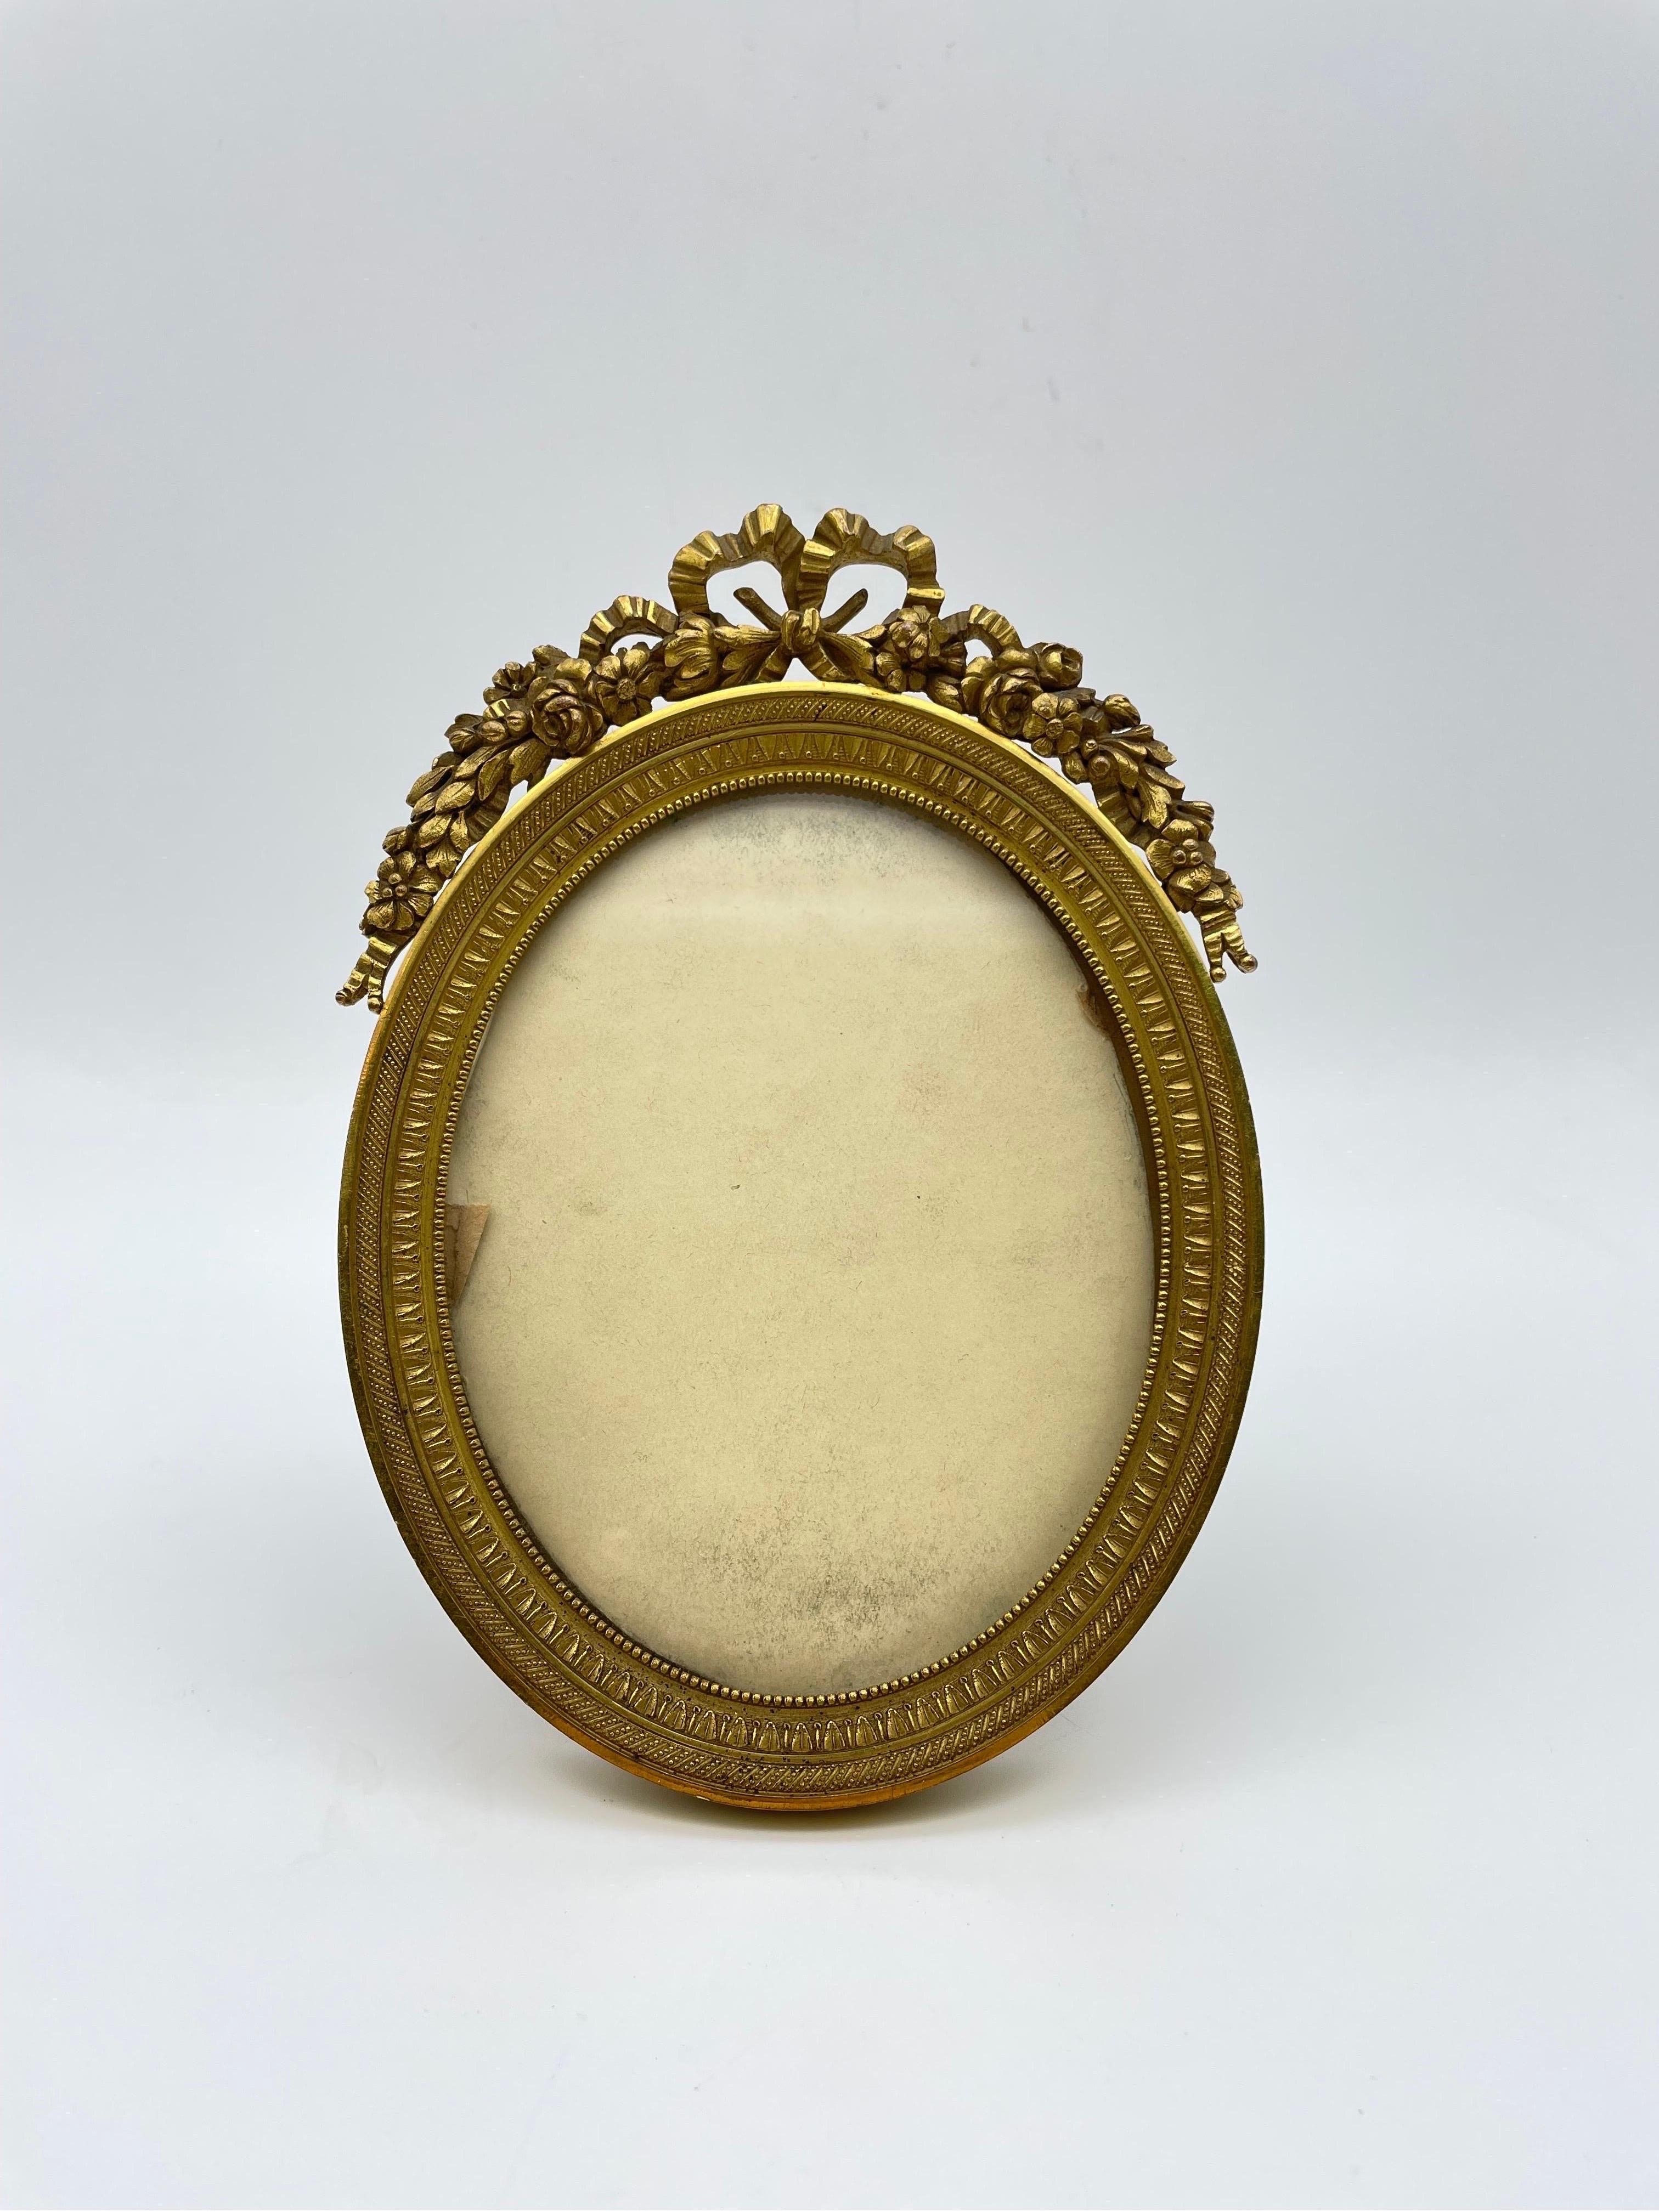 Neoclassical picture frame made of solid bronze with extremely fine engraving and gilding. Oval body with neoclassical floral crowning and a so-called Louis XVI loop.
Extremely fine and high-quality workmanship.

A stand and an eyelet are attached